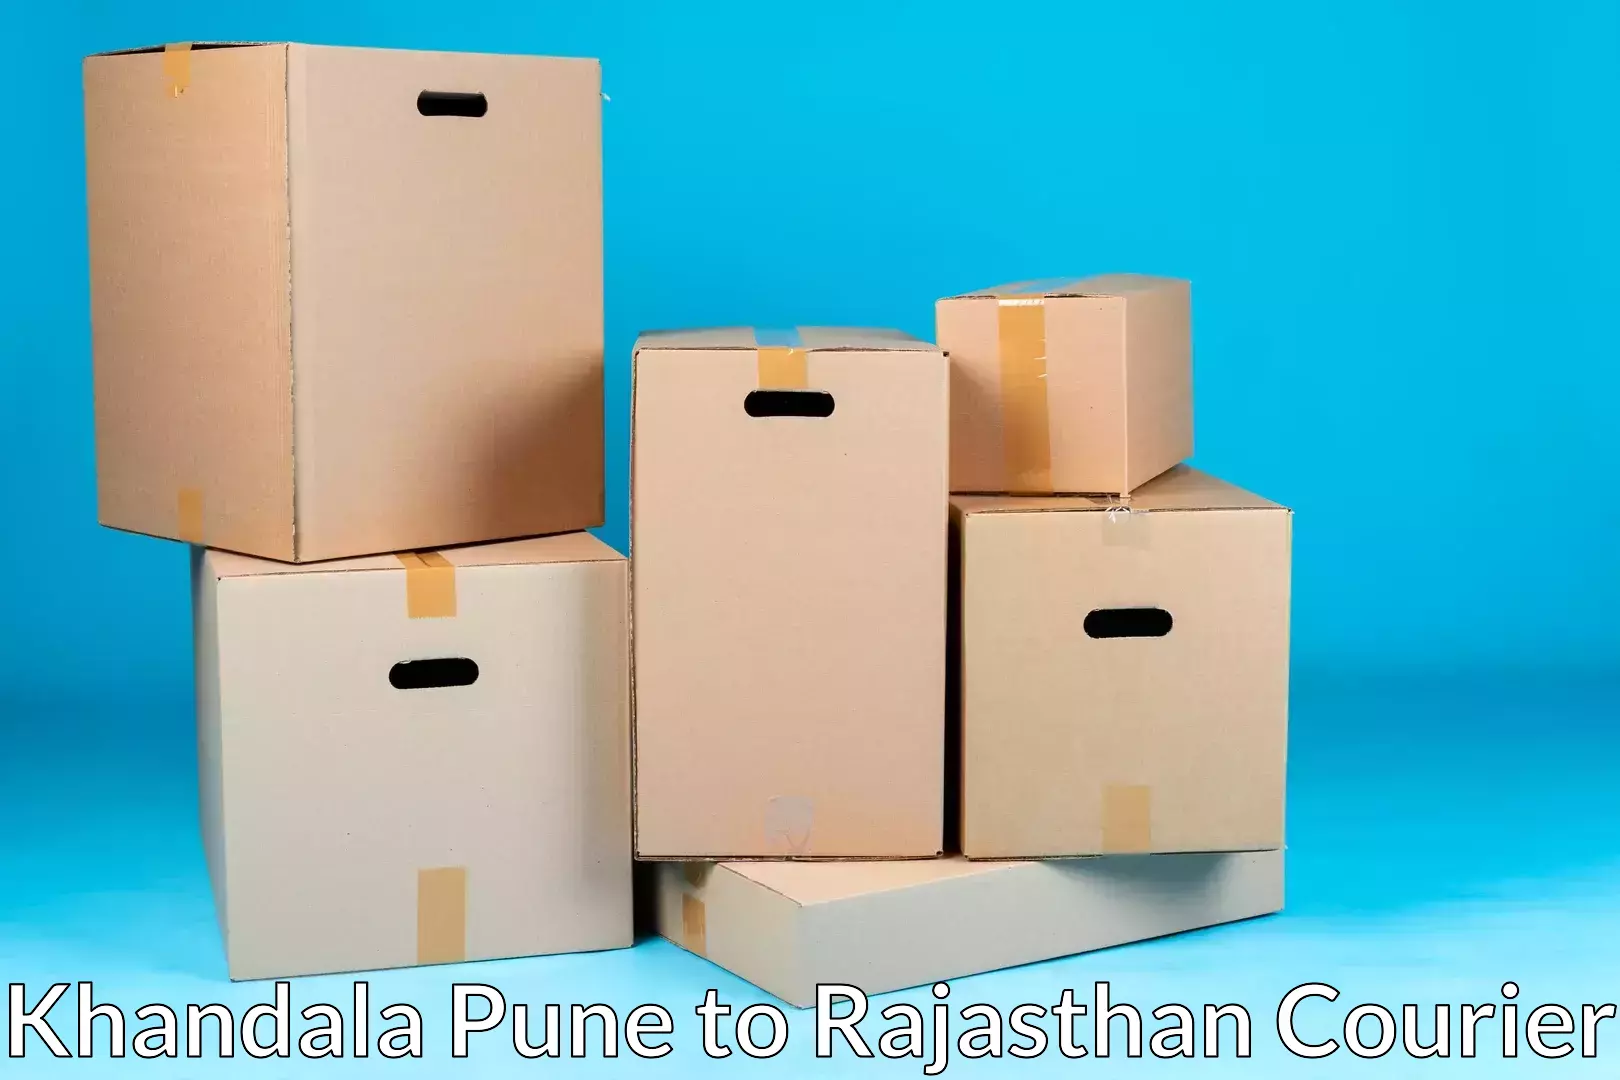 Reliable furniture movers Khandala Pune to Rajasthan